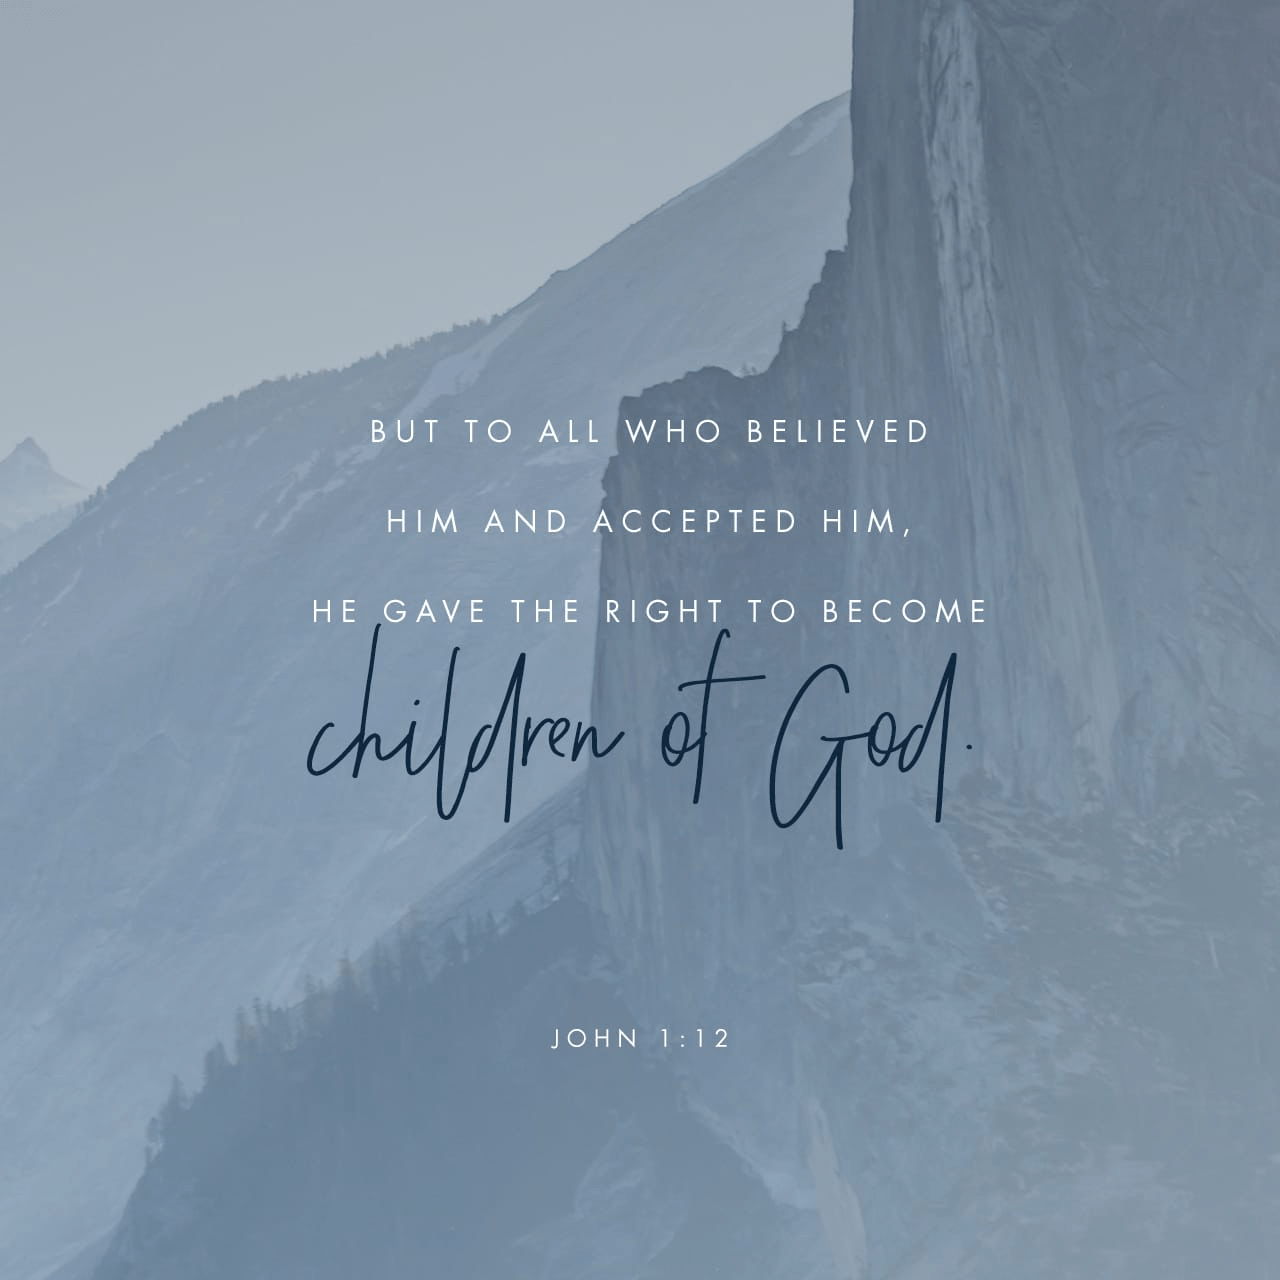 VOTD January 21 - “But as many as received Him, to them He gave the right to become children of God, even to those who believe in His name,” ‭‭John‬ ‭1:12‬ ‭NASB‬‬